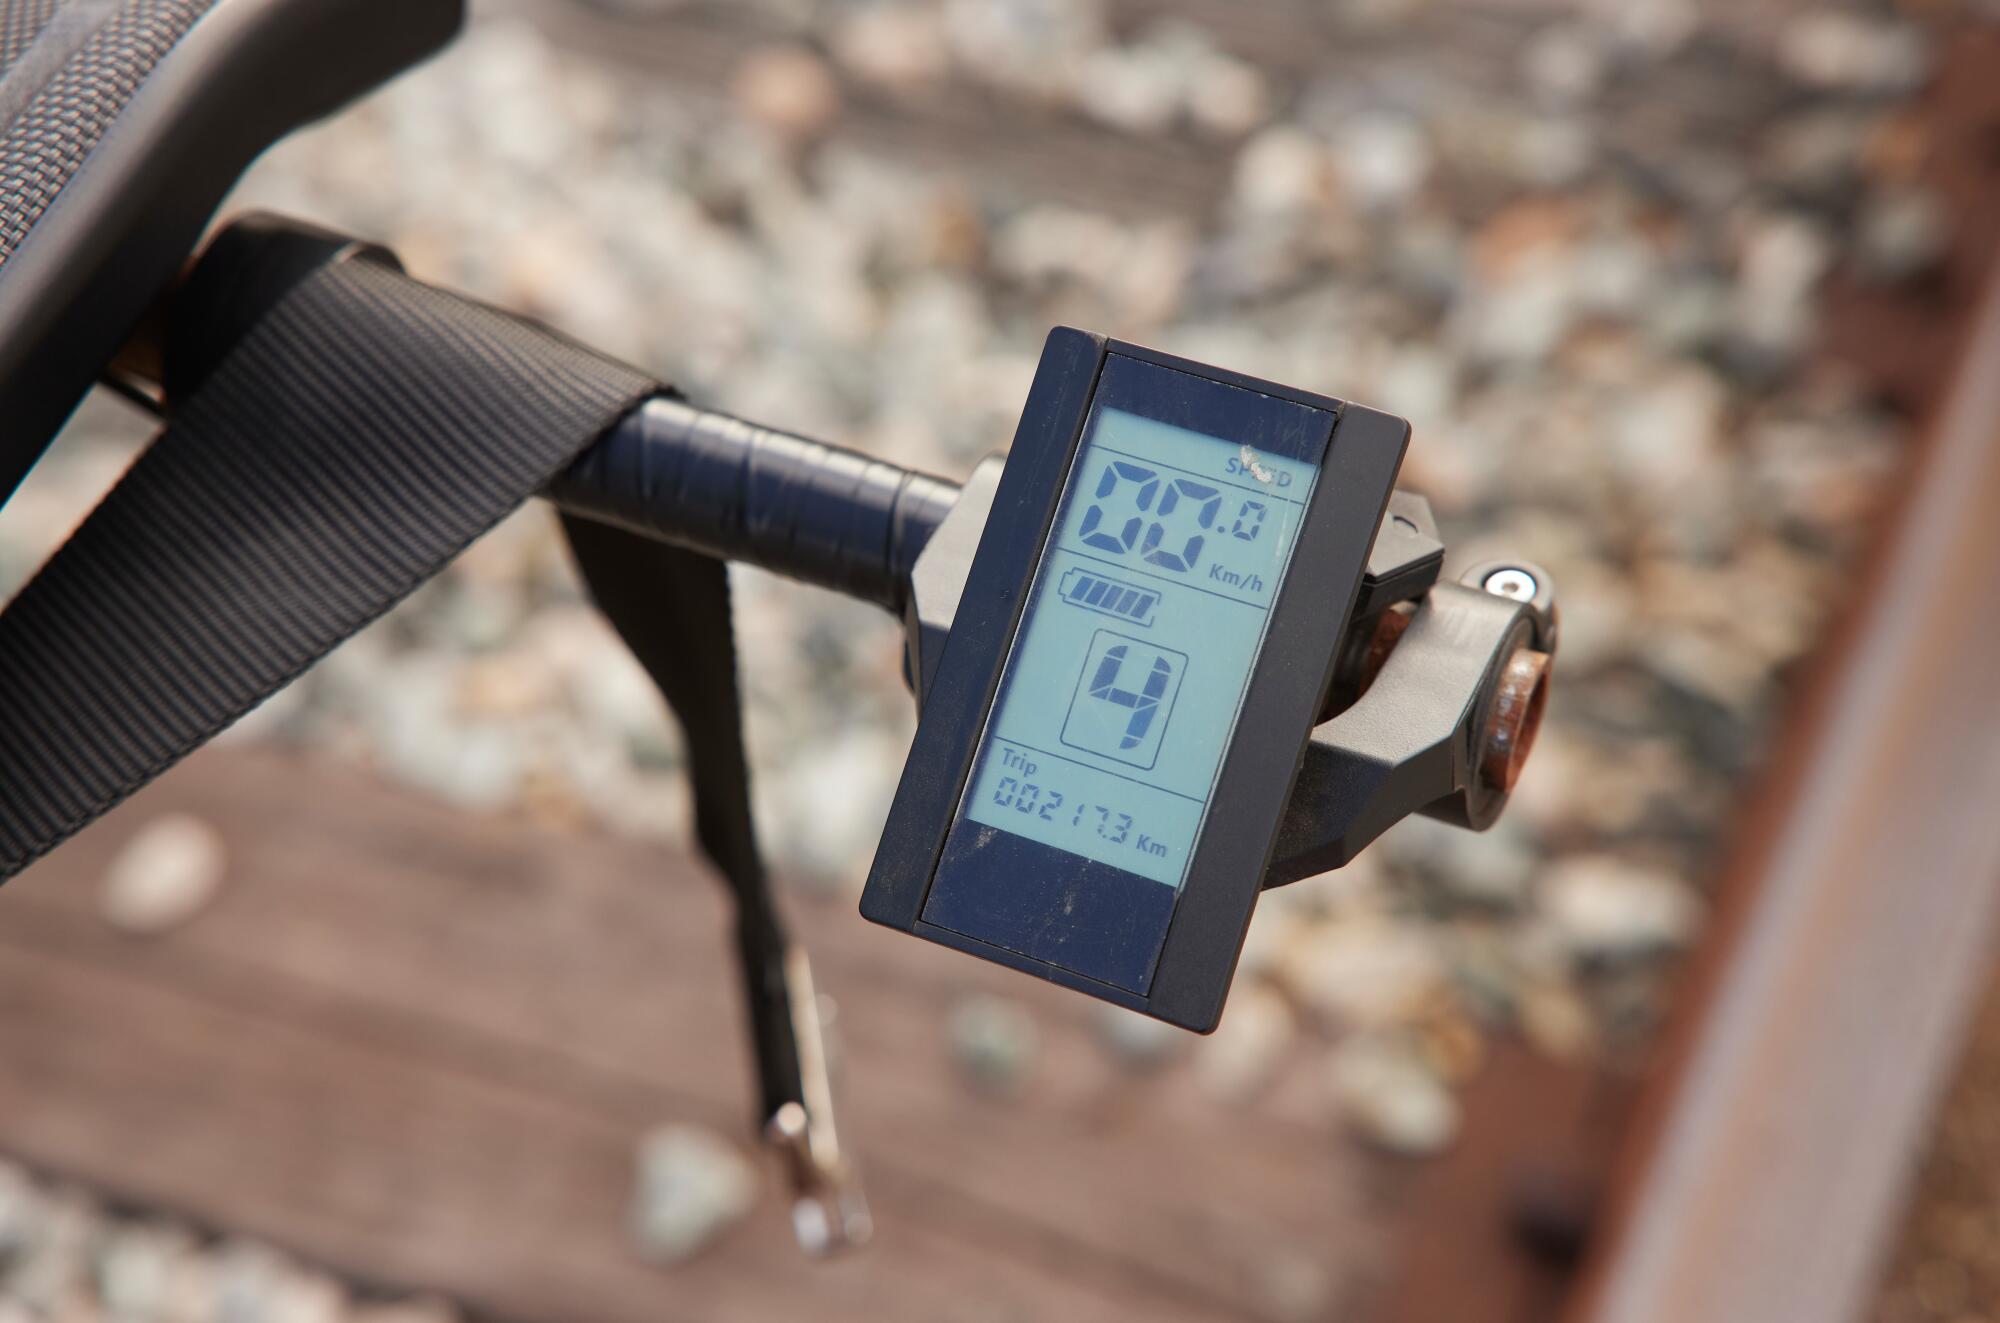 A close-up of an electric screen attached to a railbike, showing battery status and distance travelled.